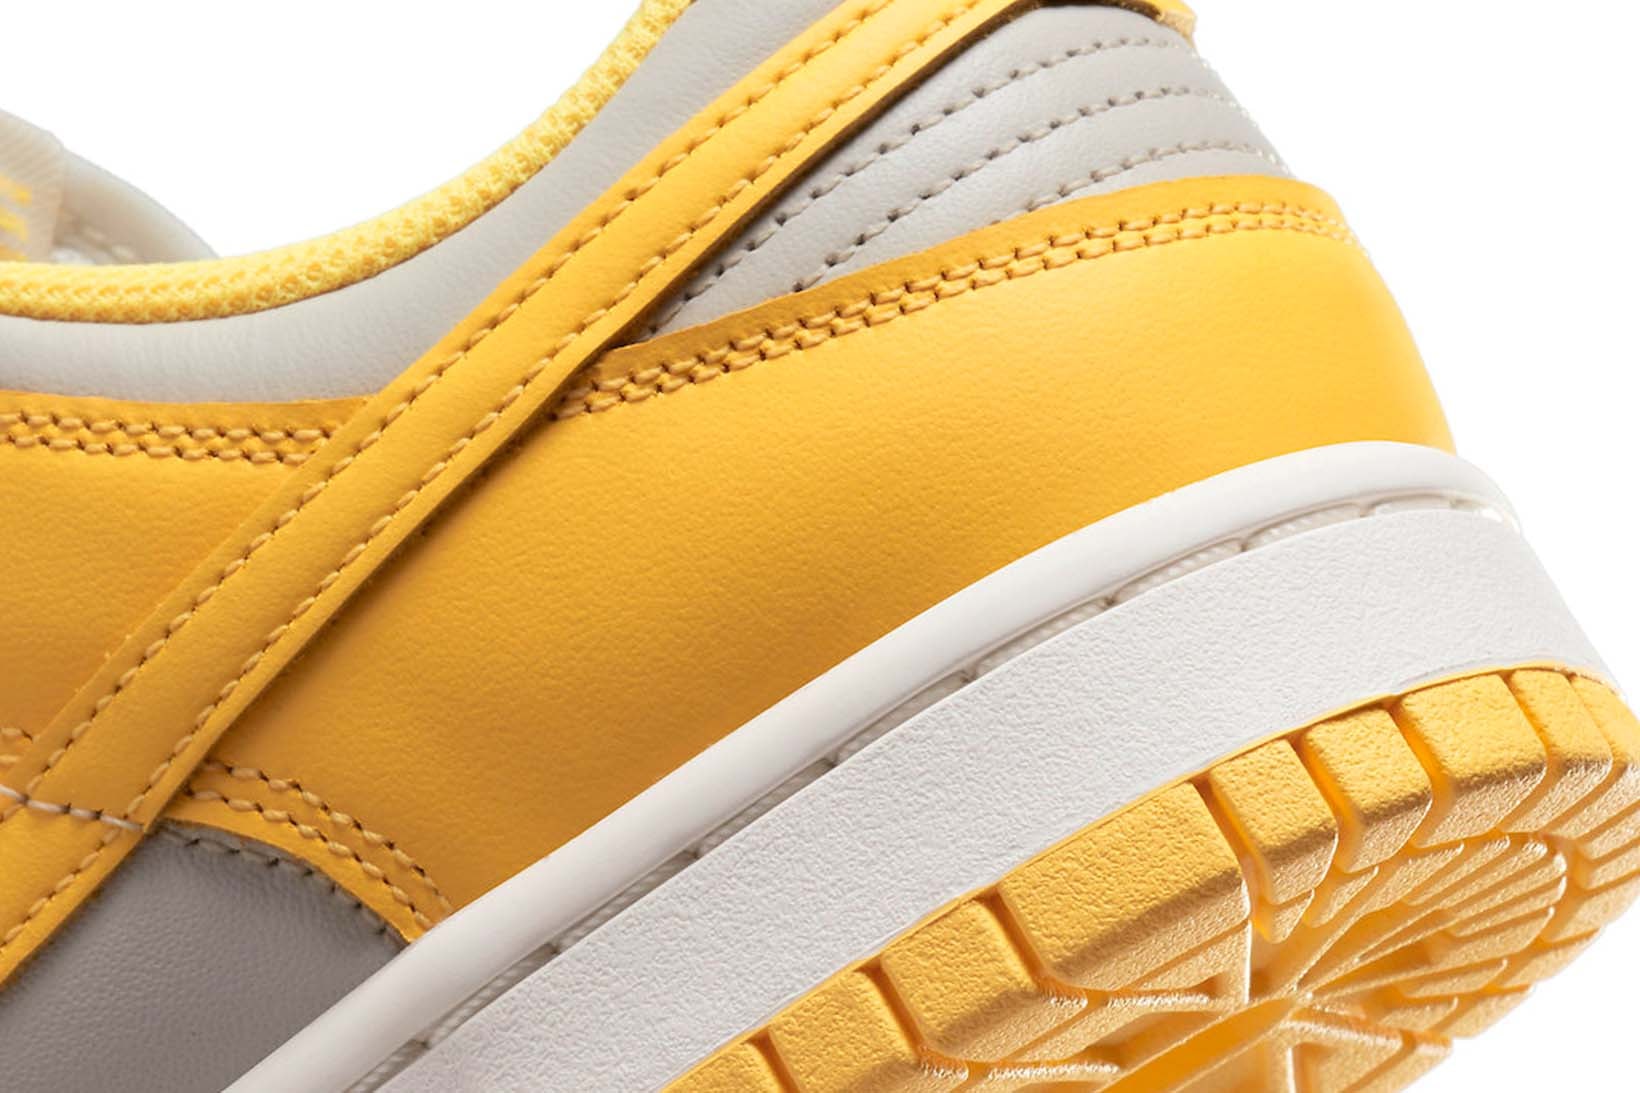 Nike Dunk Low Women's Citron Pulse Sail Price Release Date DD1503-002